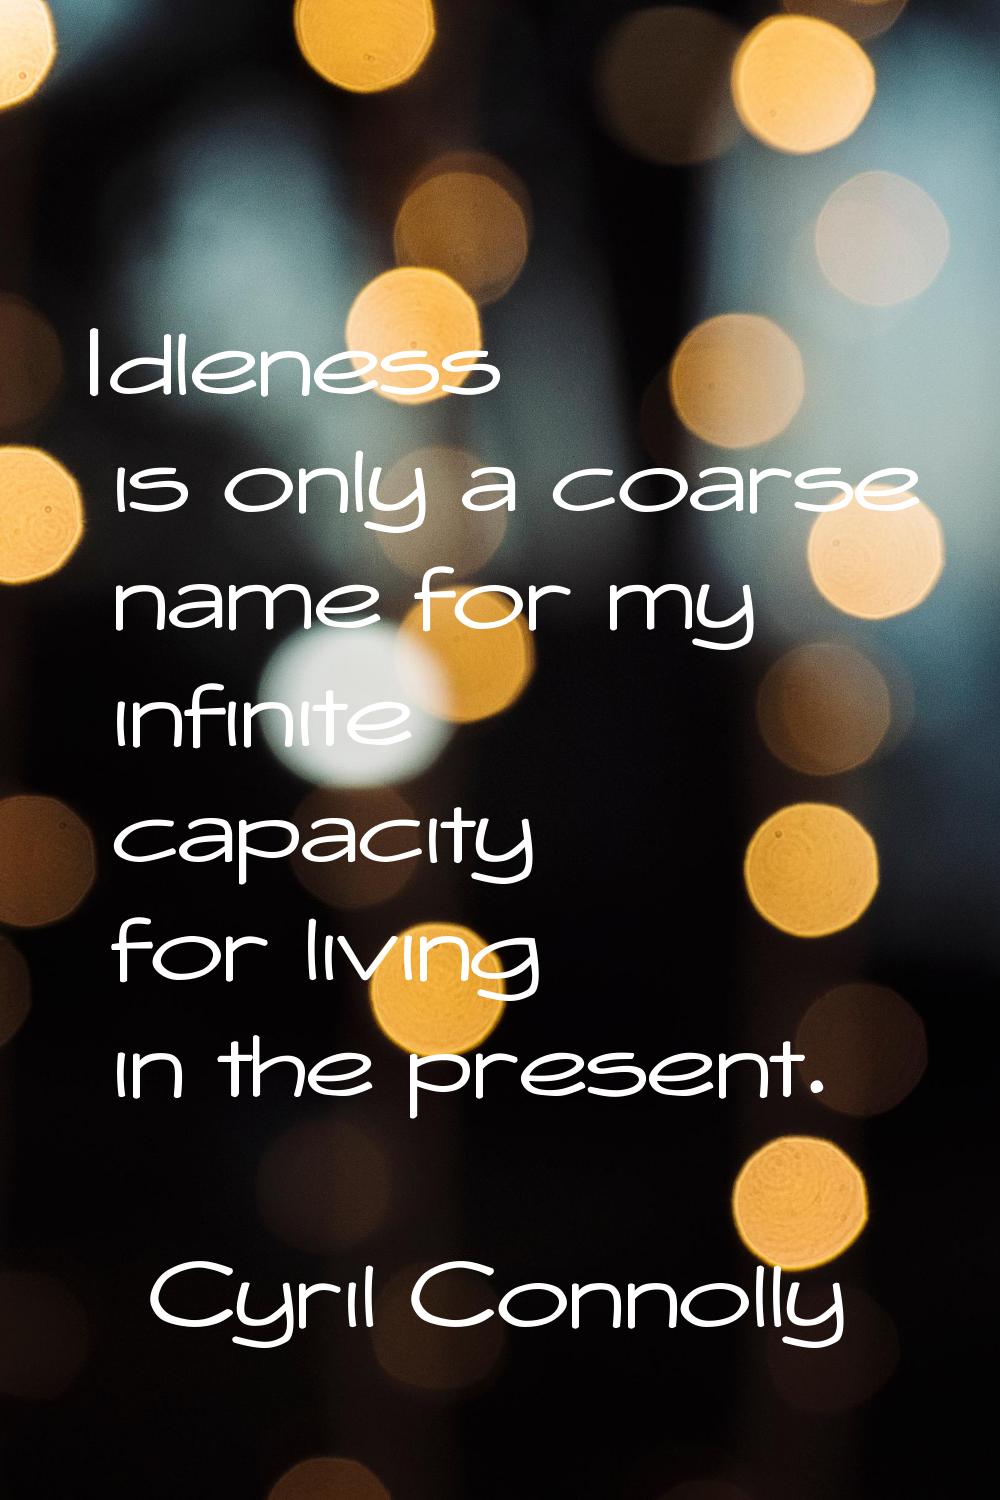 Idleness is only a coarse name for my infinite capacity for living in the present.